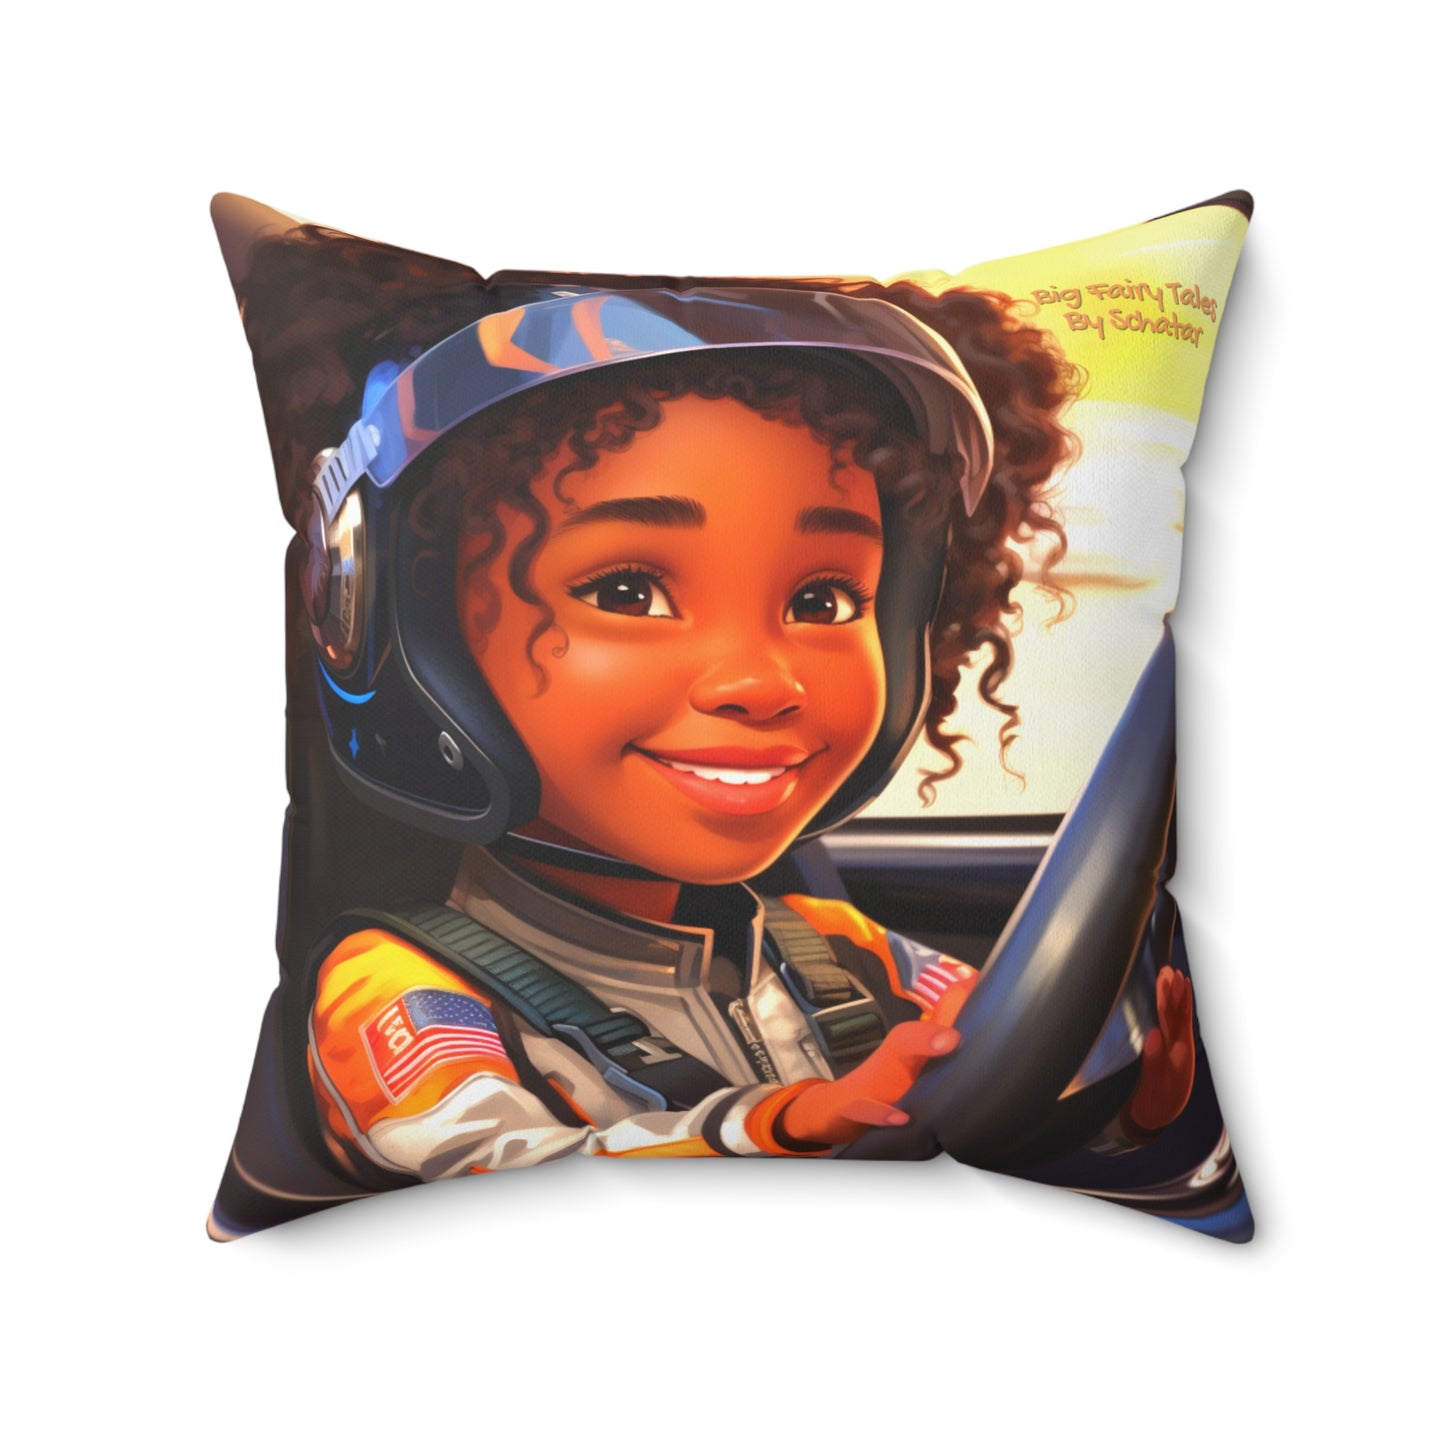 Race Car Driver - Big Little Professionals Plush Pillow 9 From Big Fairy Tales By Schatar